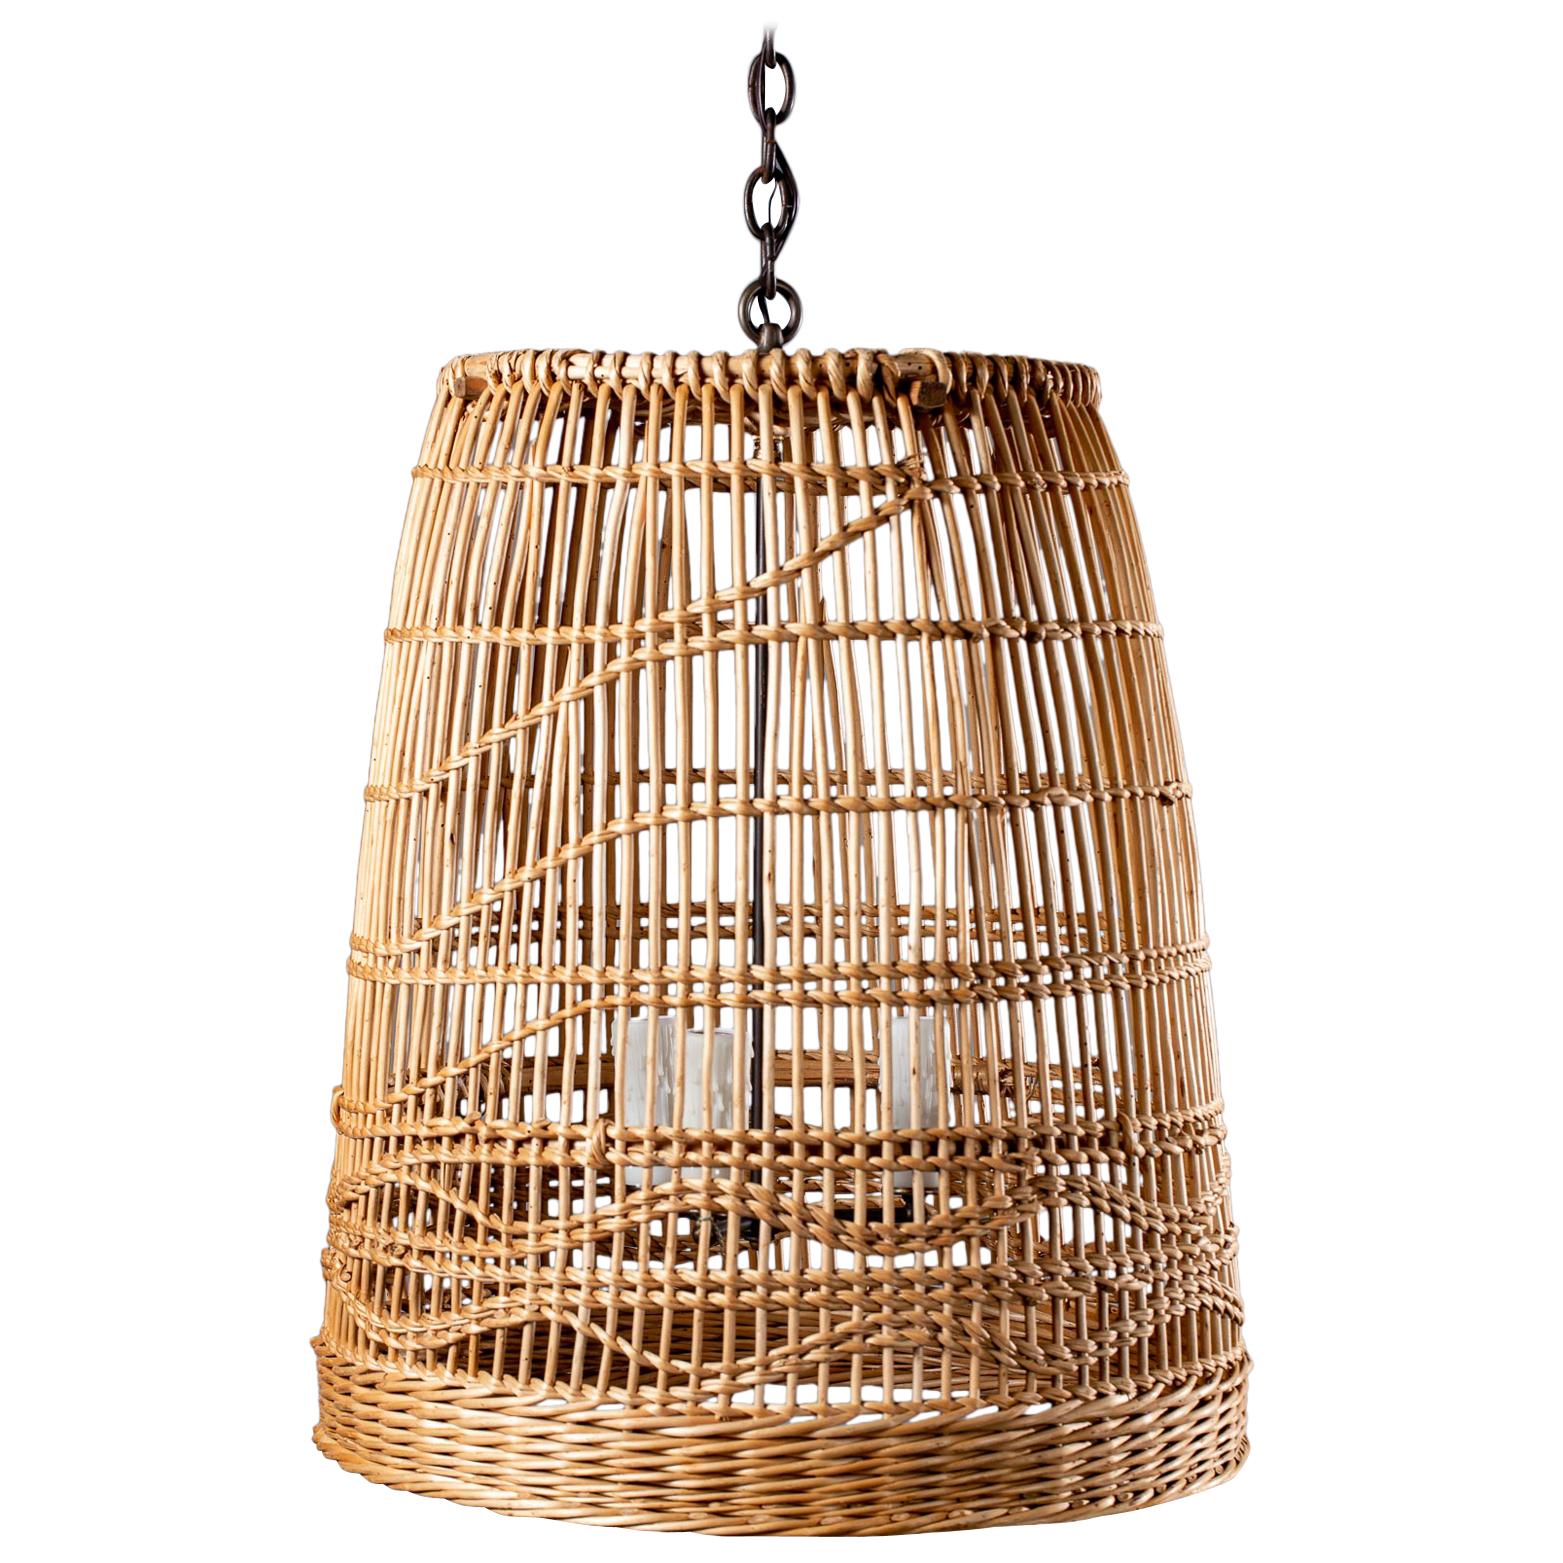 Vintage French Woven Reed Basket Chandelier Light Fixture Lantern, circa 1920 For Sale